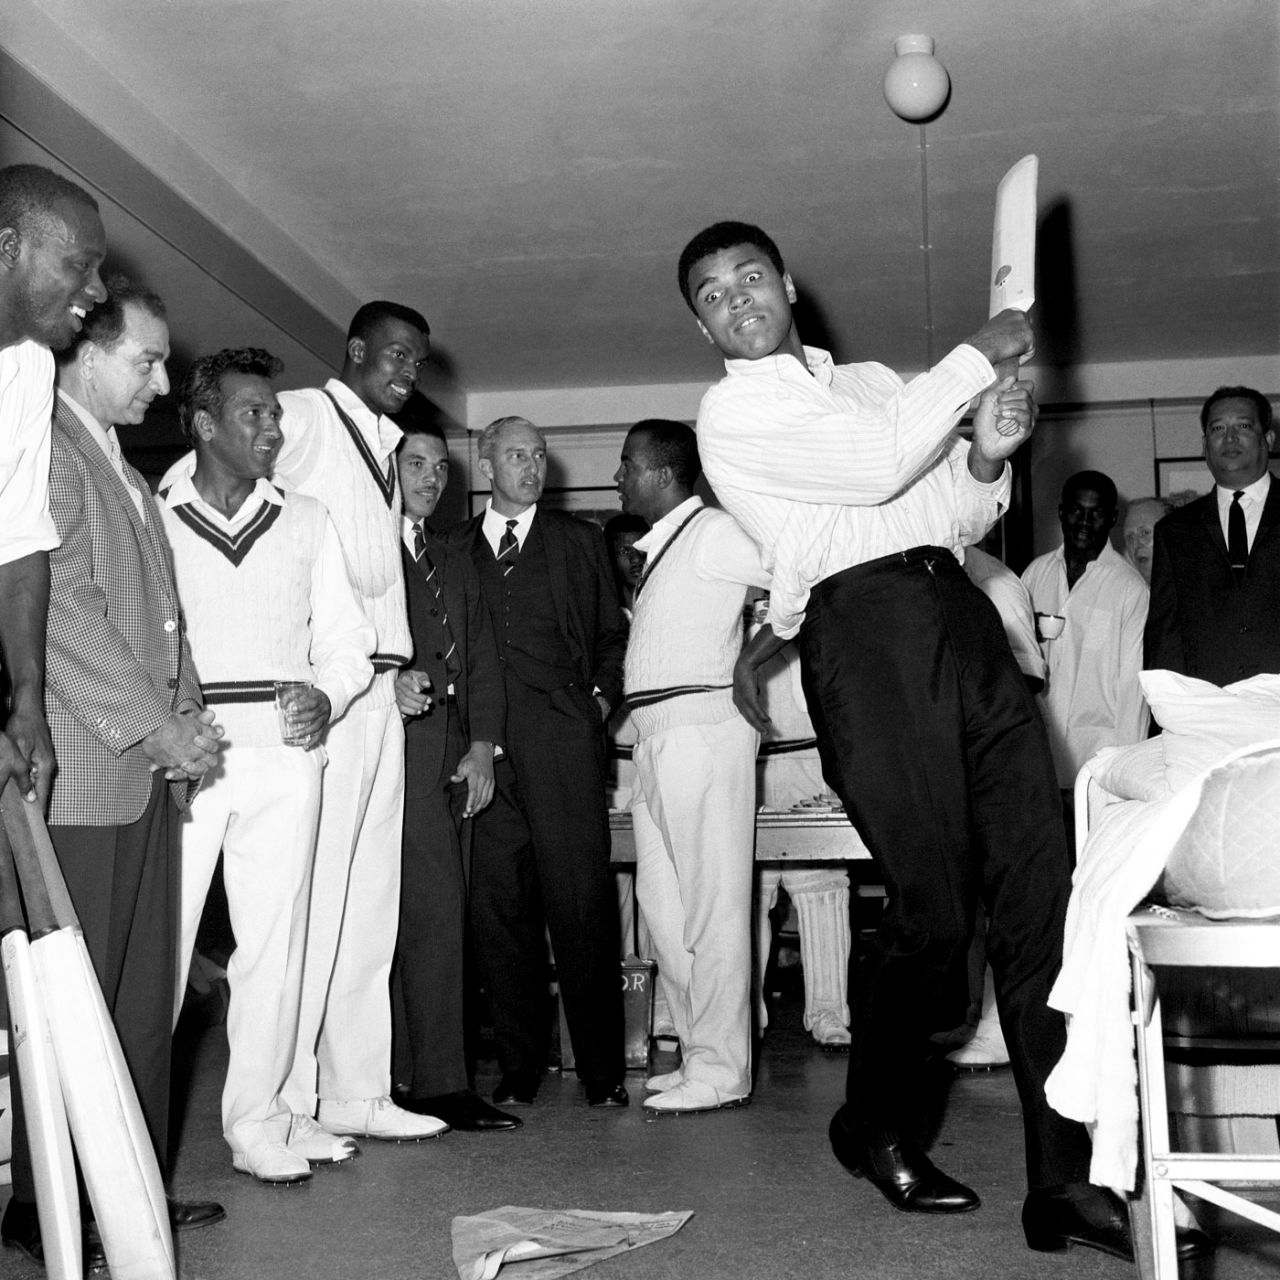 West Indies players watch Muhammad Ali bat in their dressing room at Lord's, England v West Indies, Lord's, 1st day, June 16, 1966